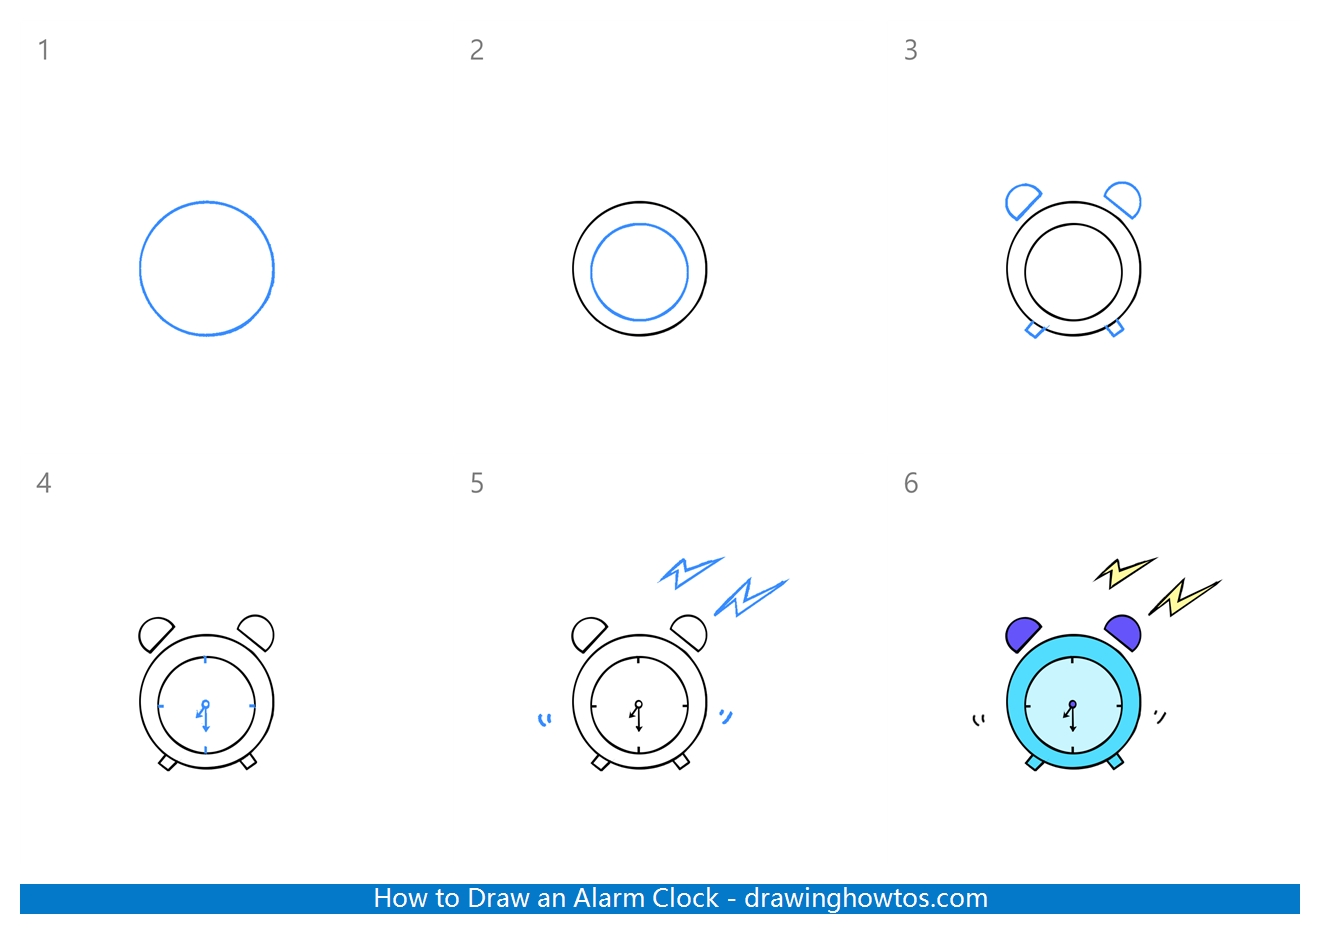 How to Draw an Alarm Clock Step by Step